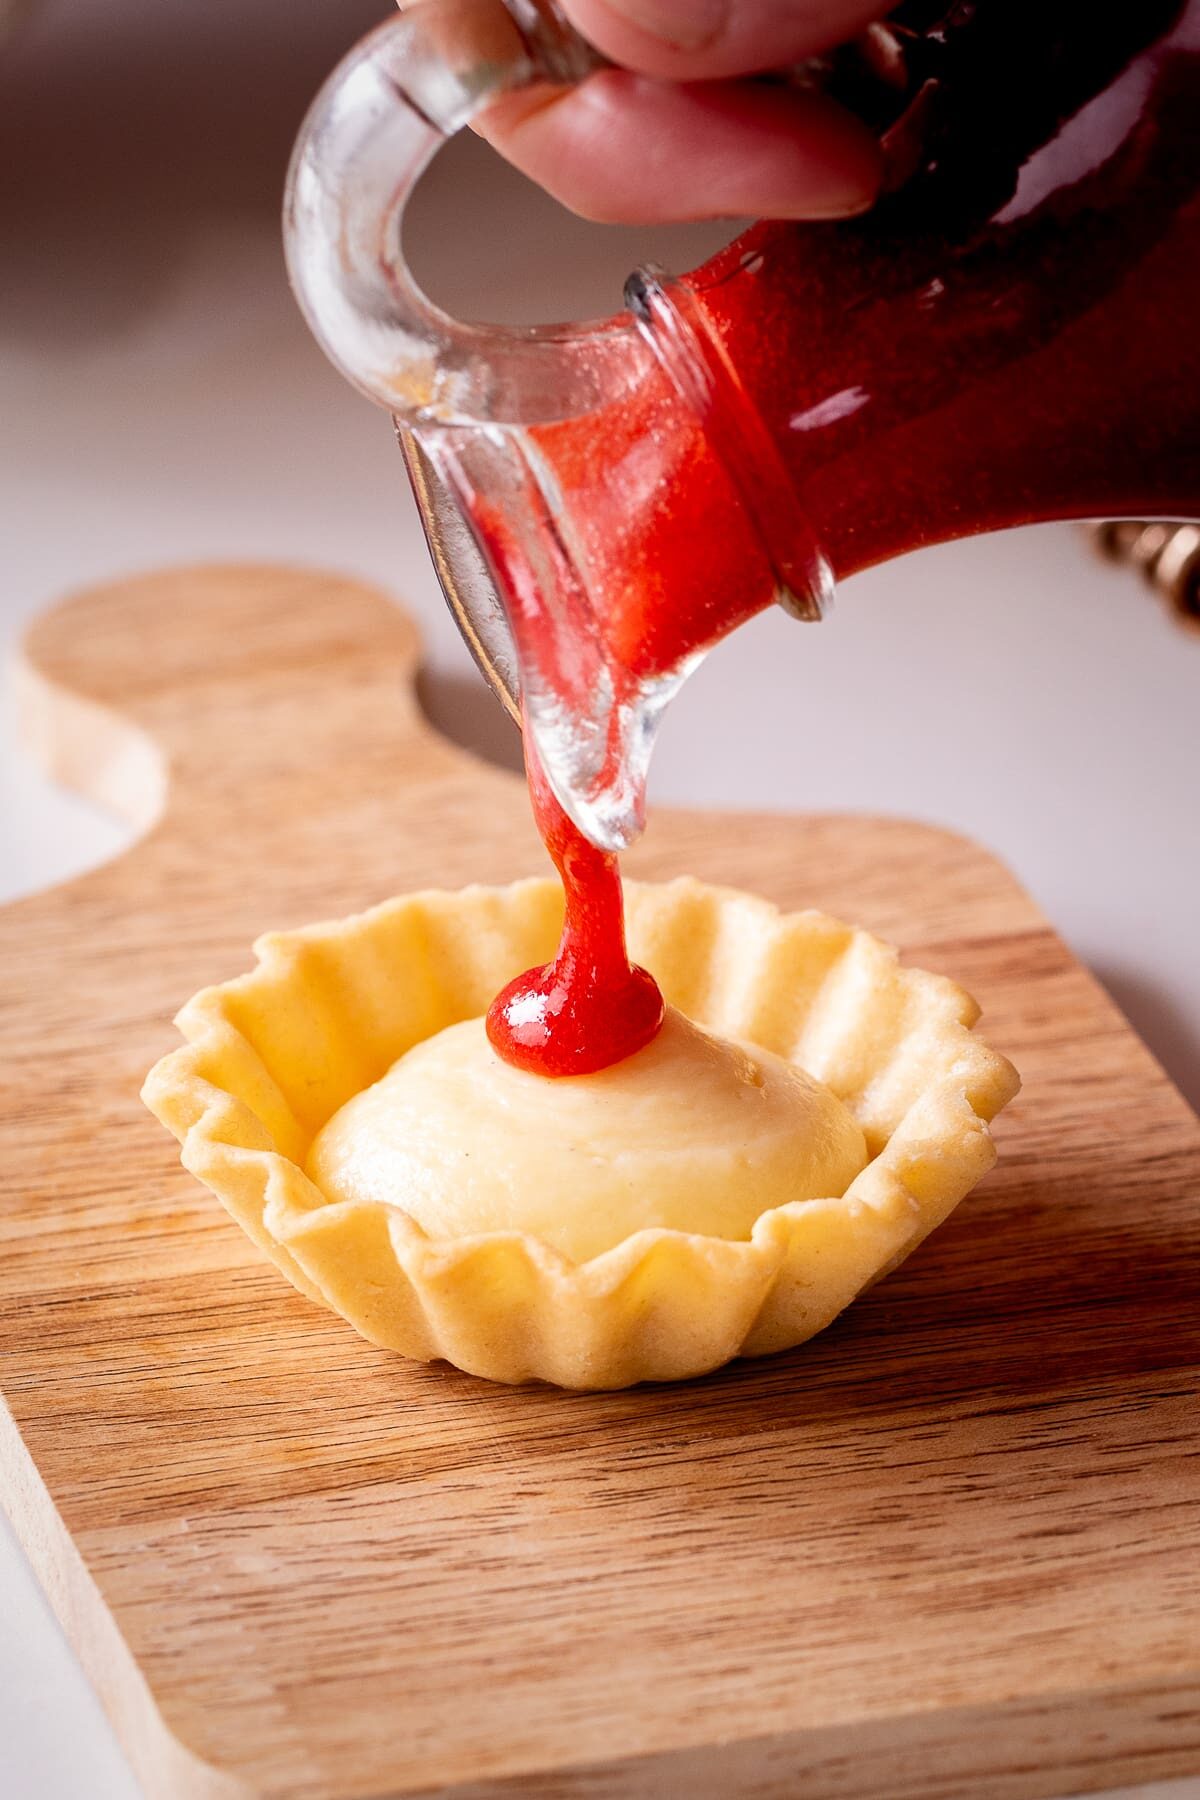 pouring strawberry coulis on tart.